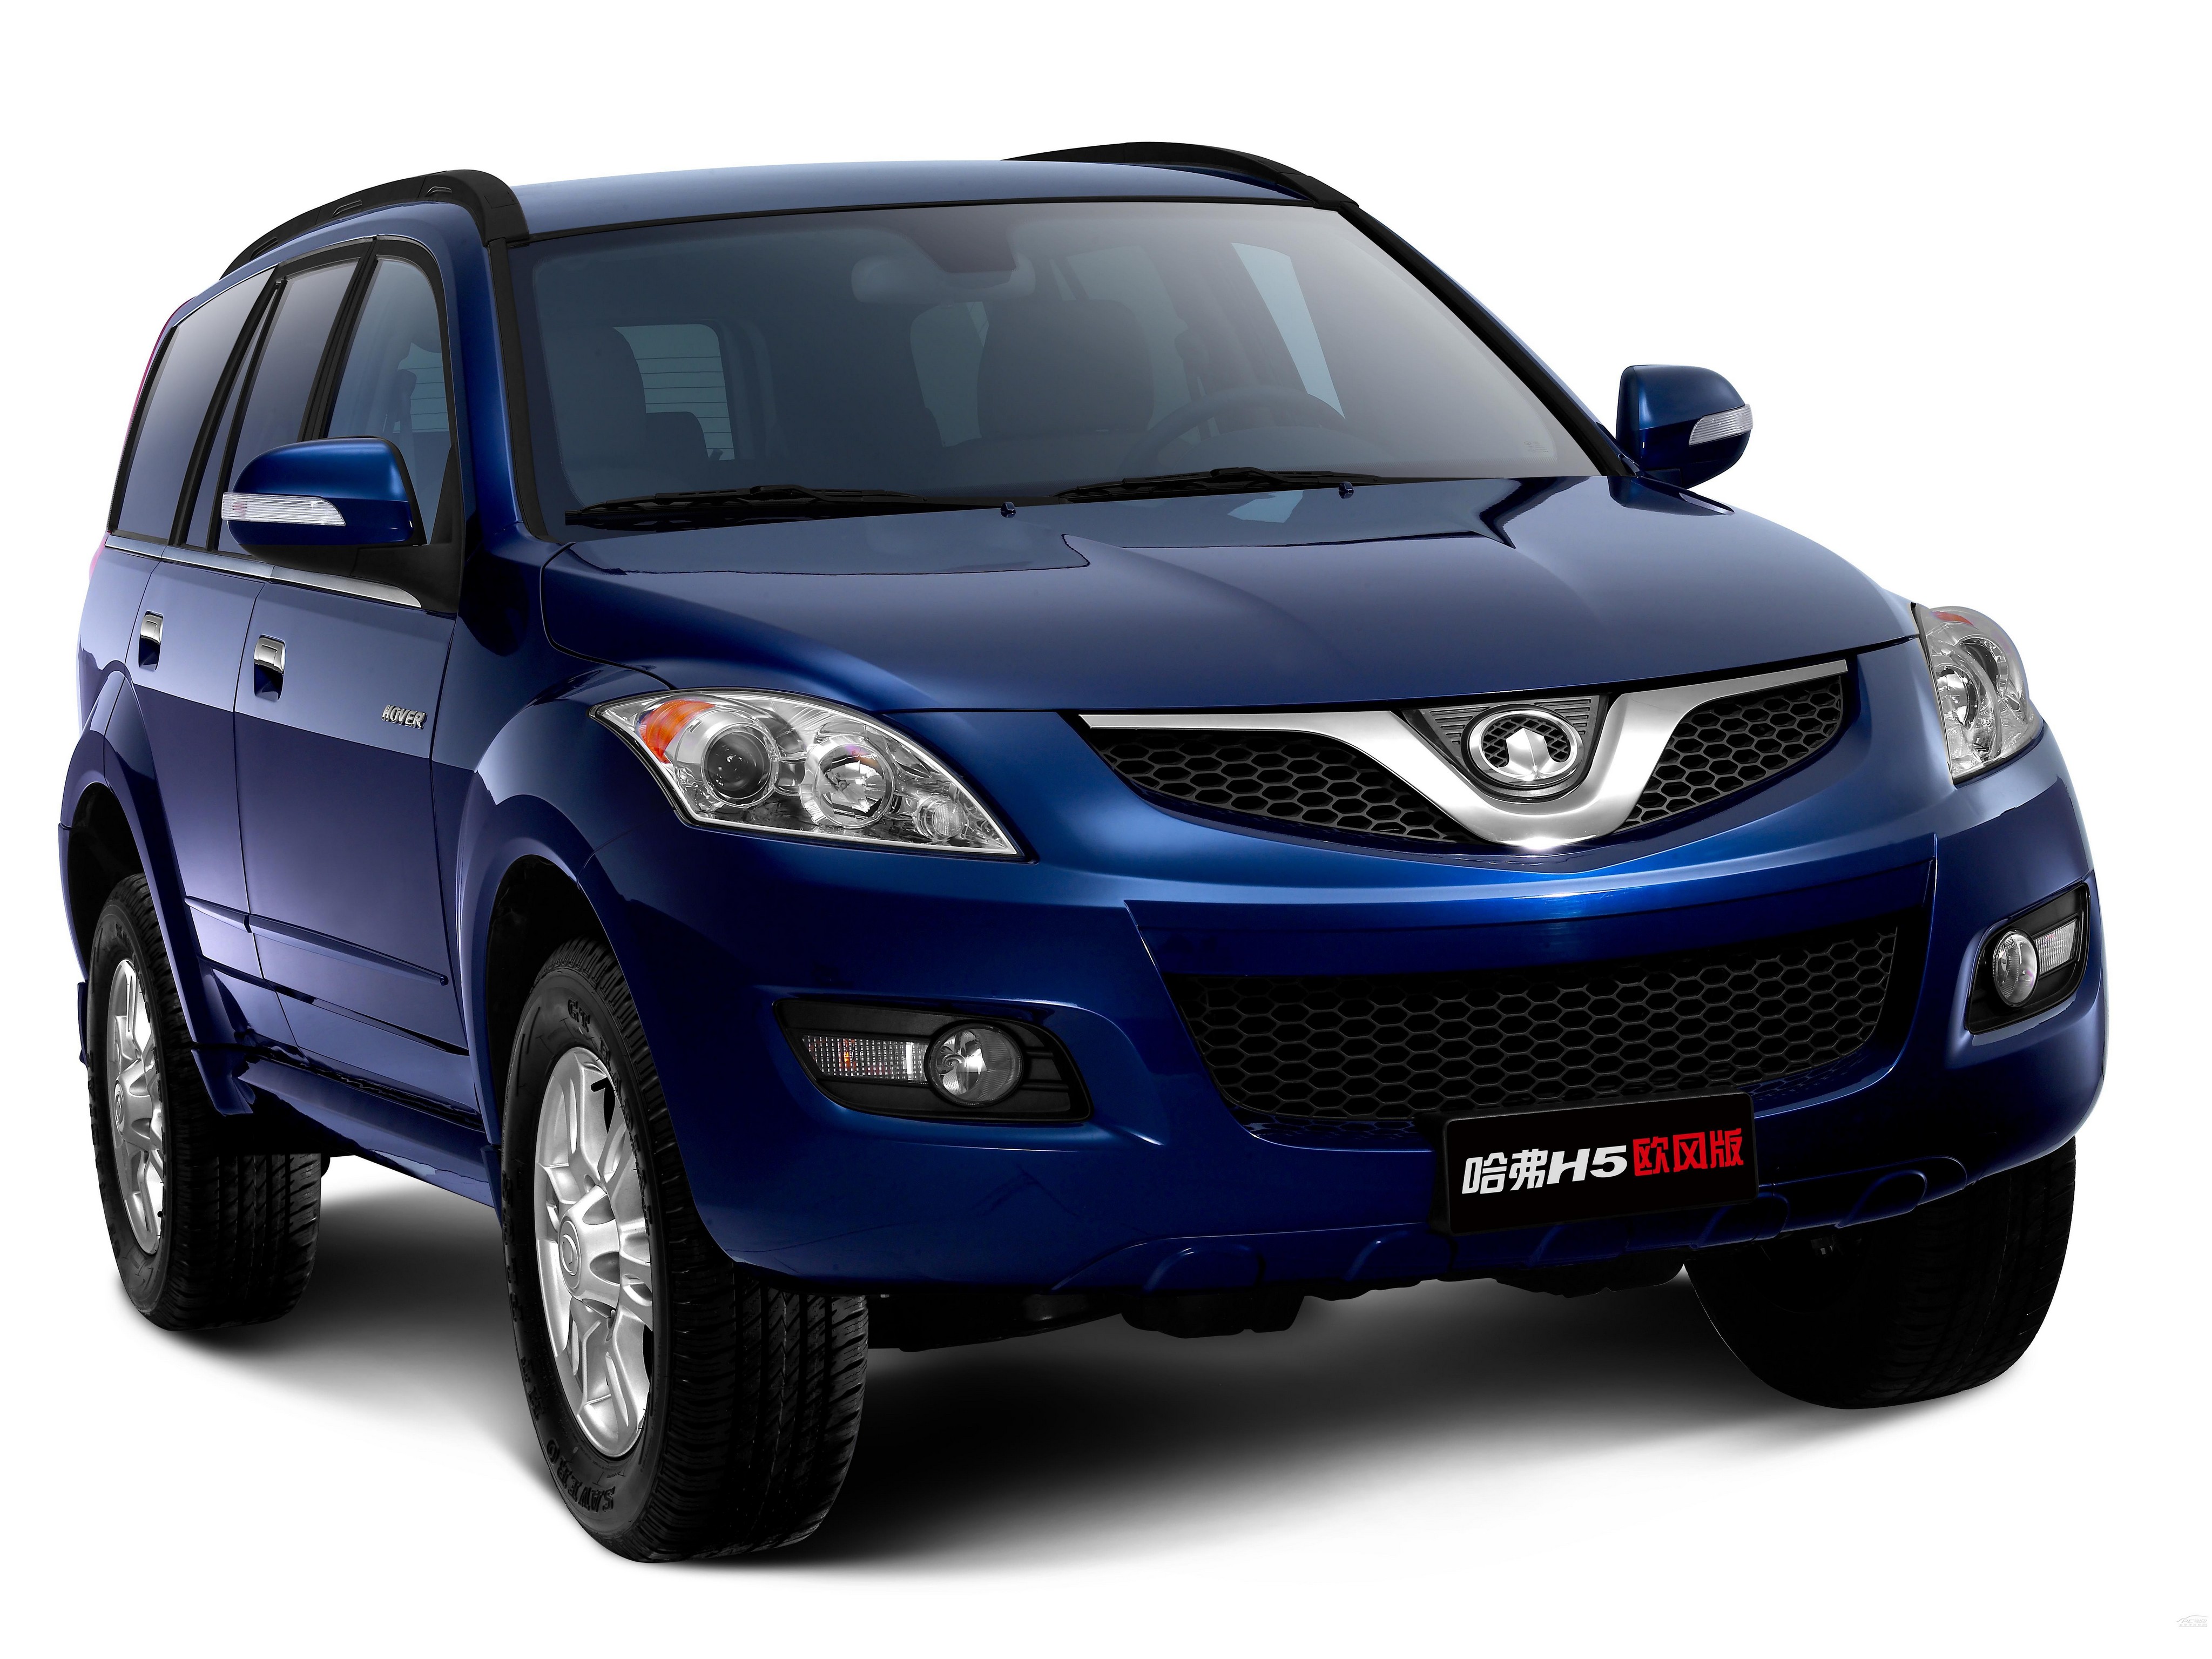 Ховер н5 2011. Great Wall Hover h5. Внедорожник great Wall Hover h5. Great Wall Haval h5. Great Wall Hover h5 2014.